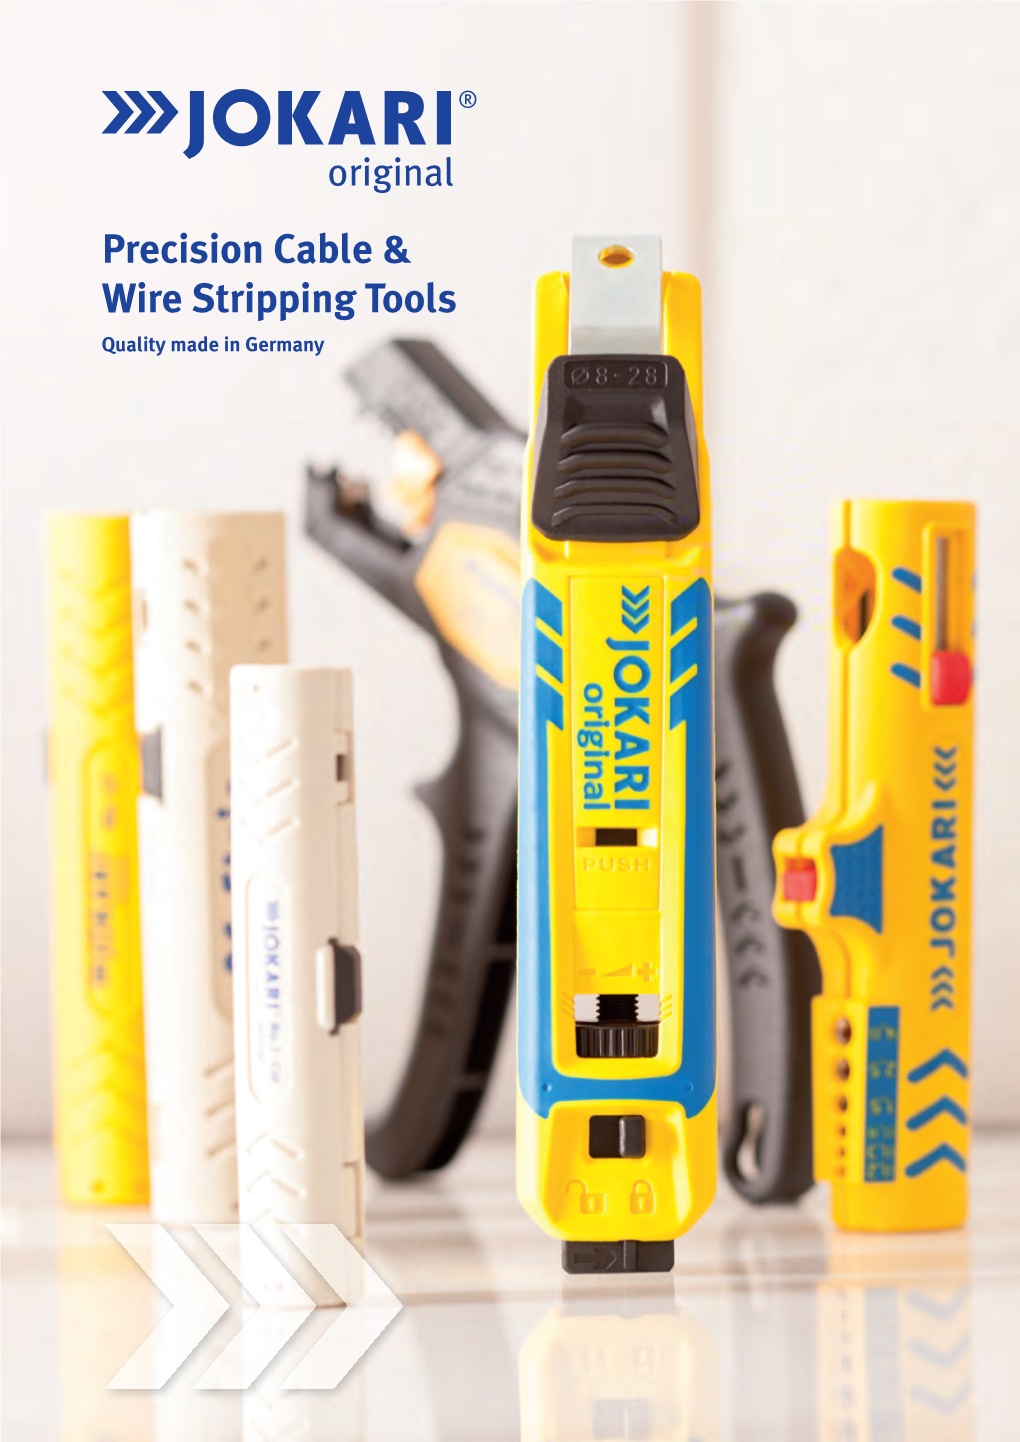 Precision Cable & Wire Stripping Tools